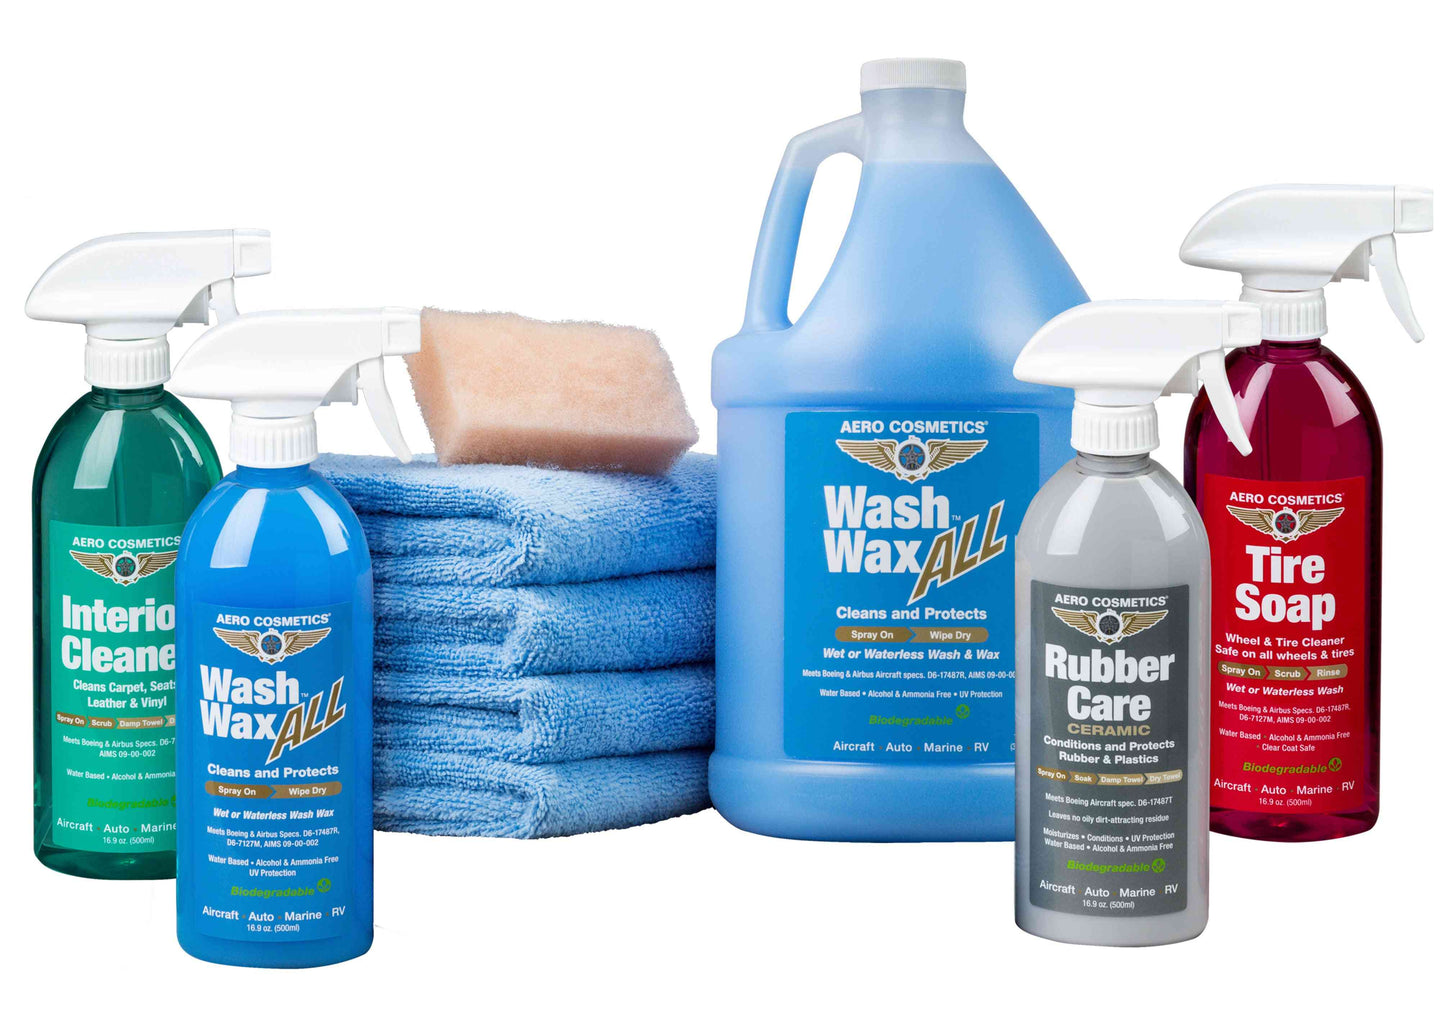 Waterless Car Wash Kit 192 oz - Wash Wax ALL, Interior Cleaner, Tire Soap, Rubber Care